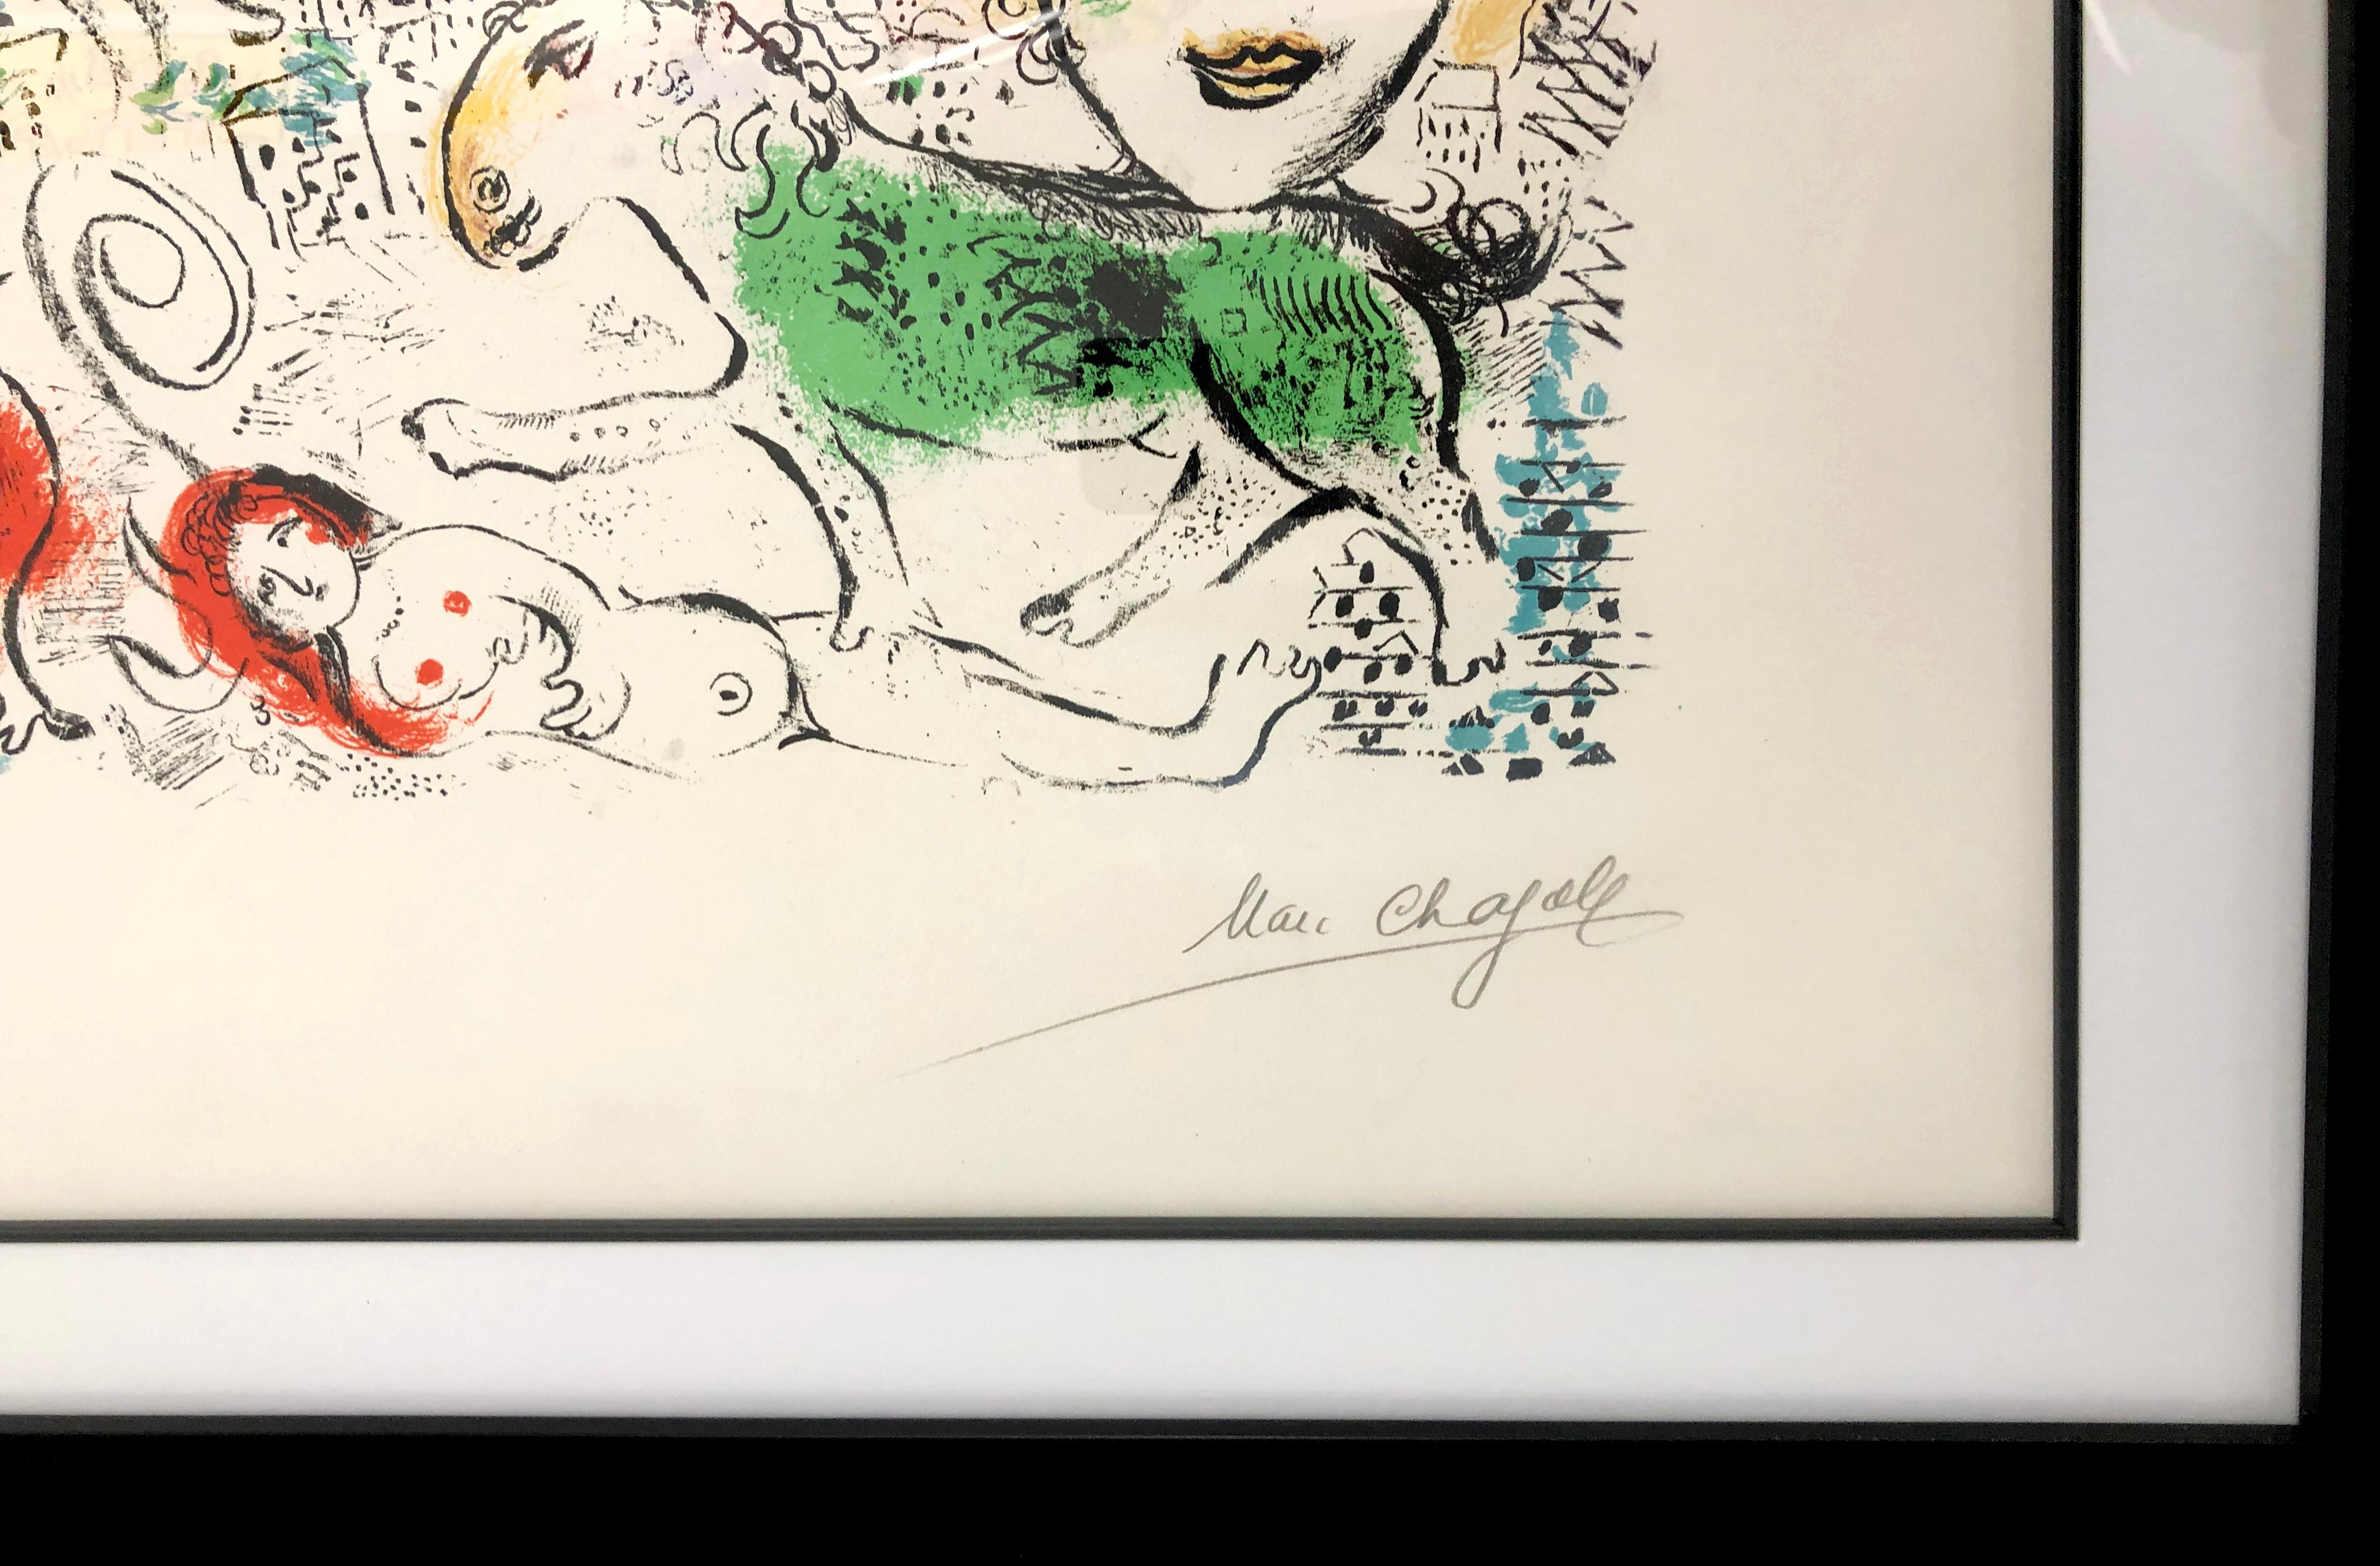 UNTITled FROM XXe SIECLE (MOURLOT 699) - Print de Marc Chagall